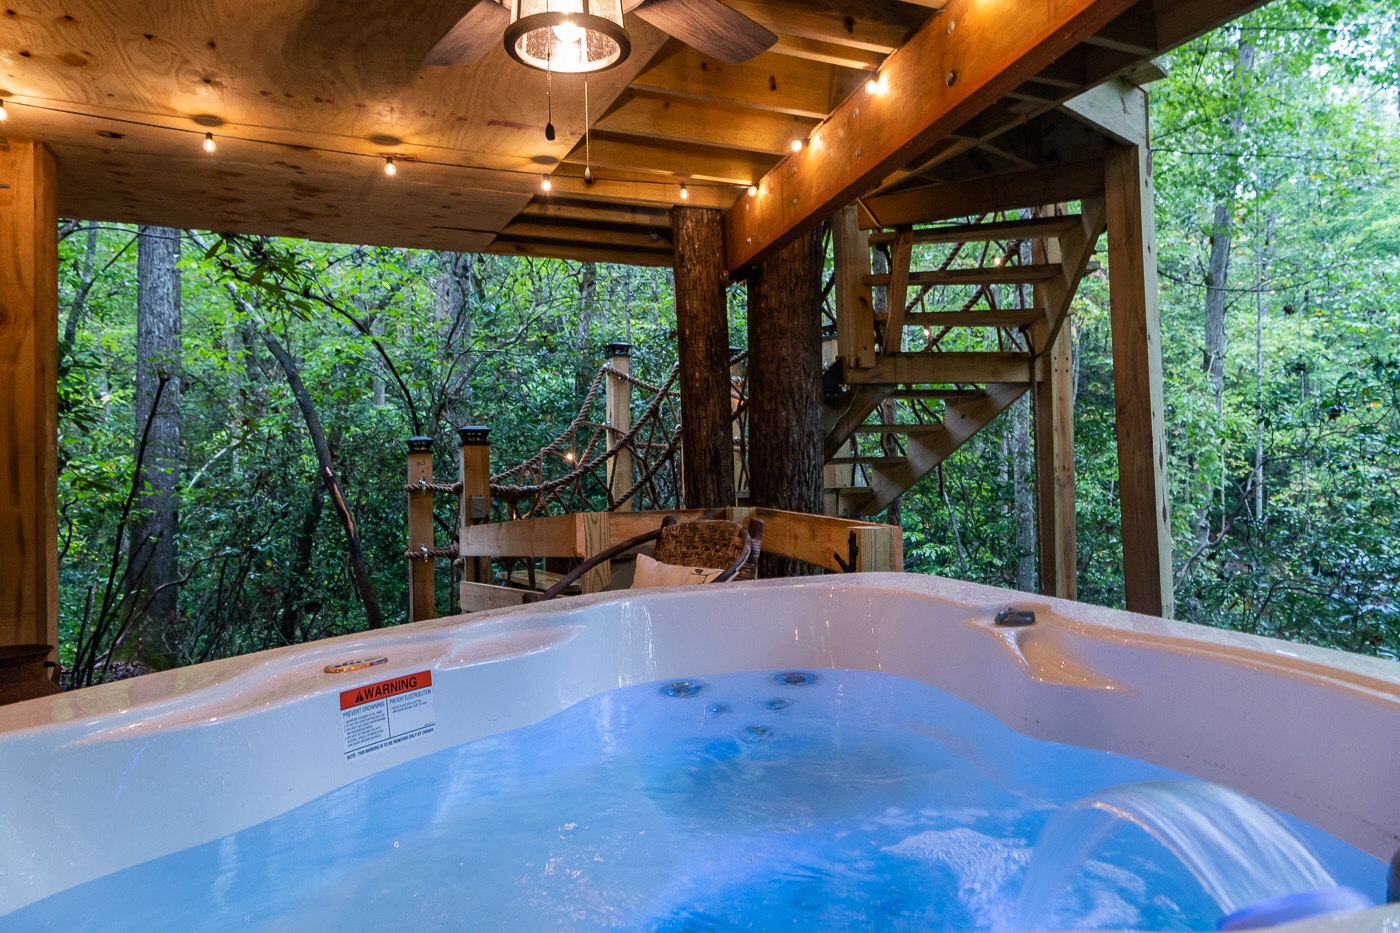 Luxurious Secluded Romantic Treehouse with Hot Tub - Treehouses for Rent in  Old Fort, North Carolina, United States - Airbnb